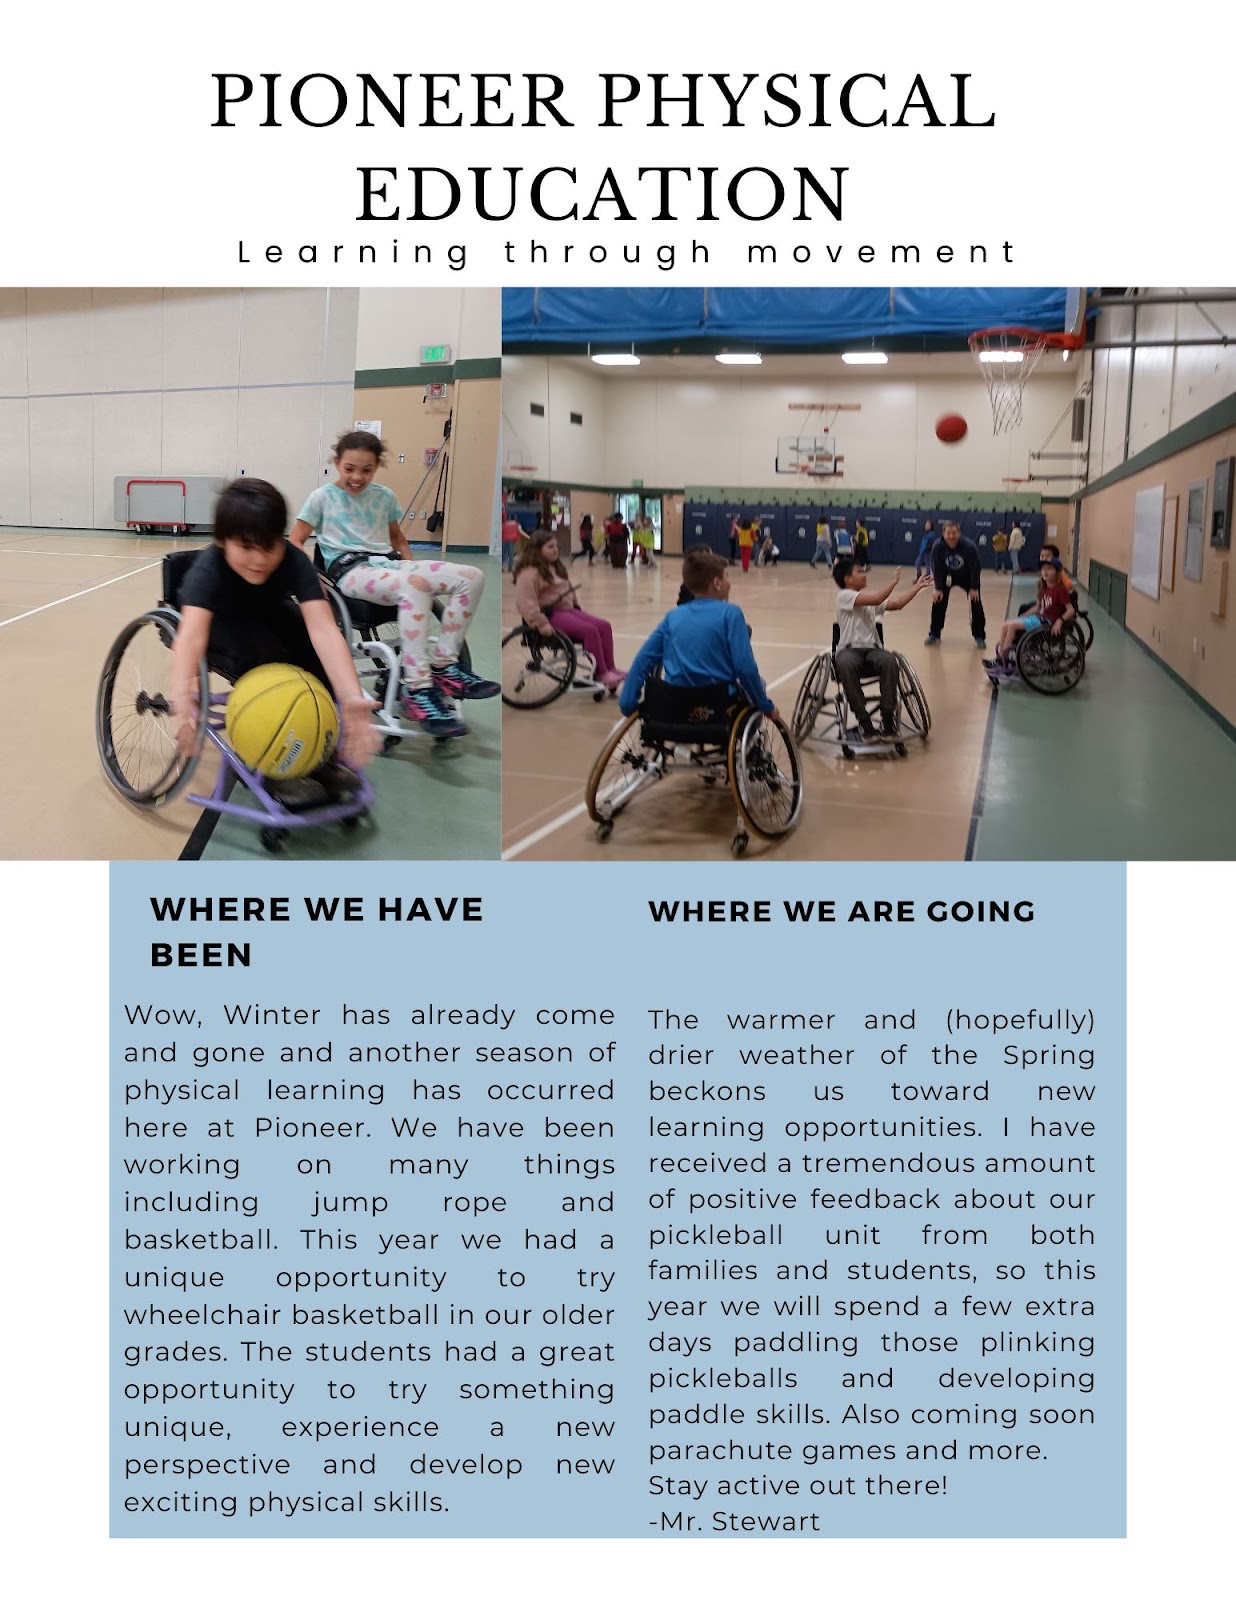 Photos and news from our PE specialist - Students have been working on jump rope and basketball. This year we had the unique opportunity for our older students to experience wheelchair basketball showing them a new perspective while developing physical skills. This upcoming spring we will be focusing on pickleball. 